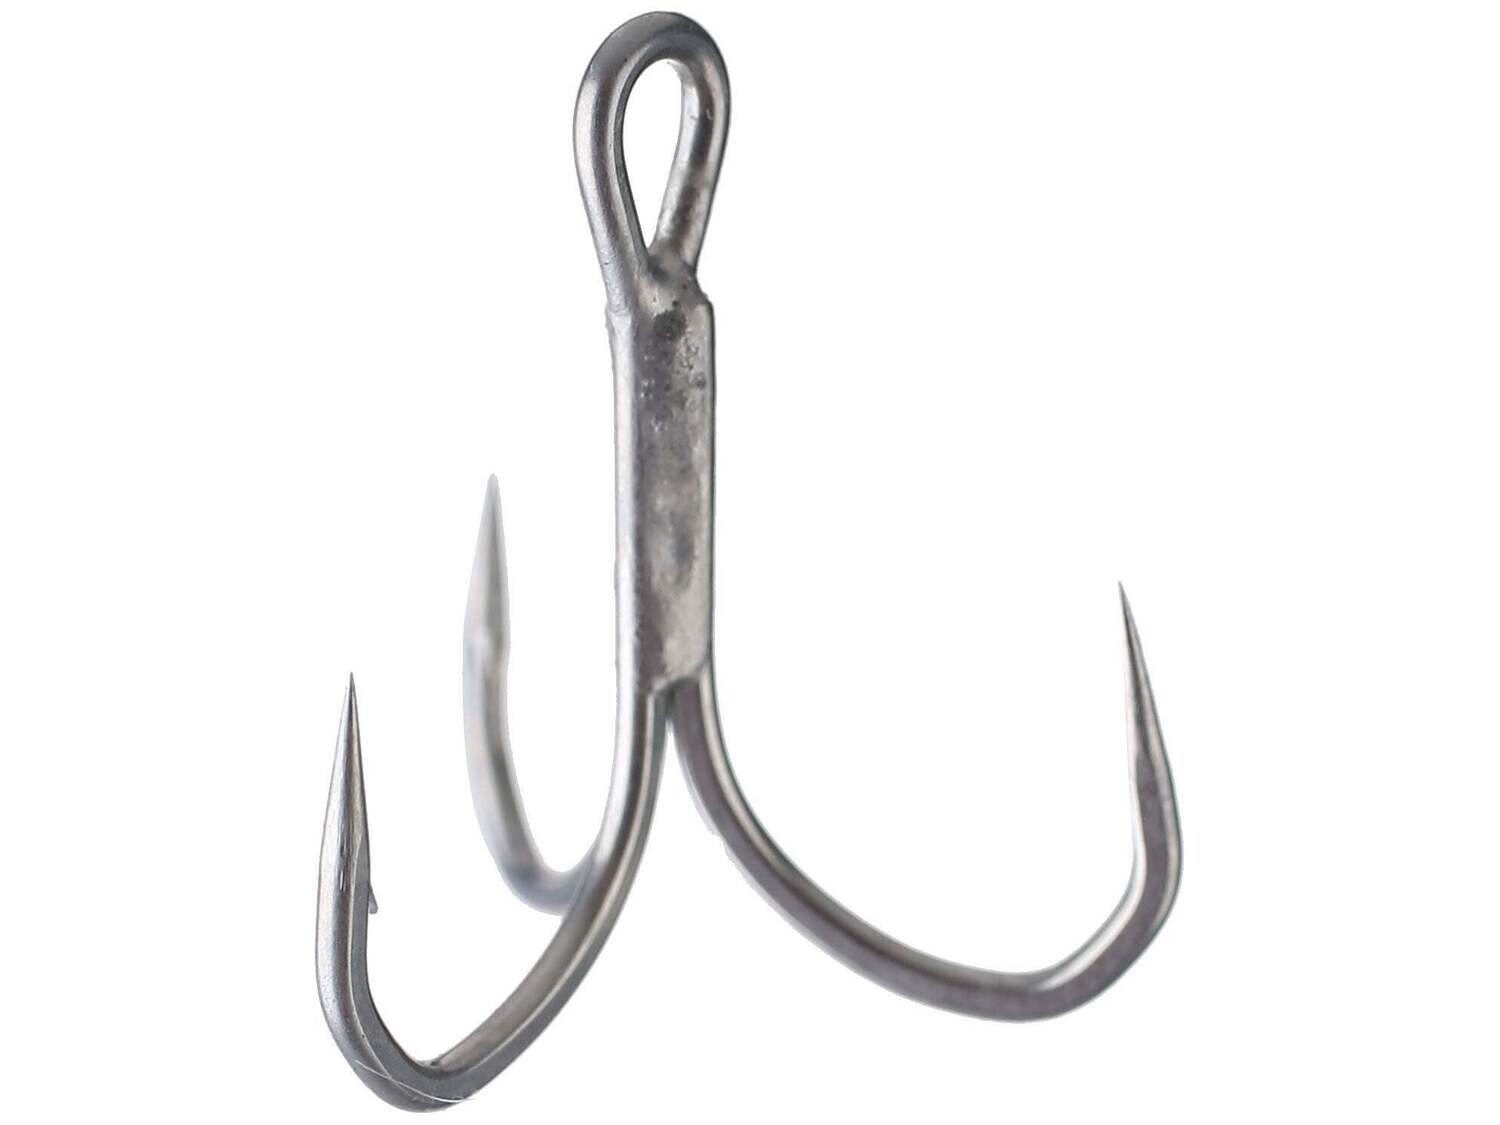 Owner 5645-065 STX-45 Zo Wire Treble Hook, XX+ strong, size 5, 8/pk